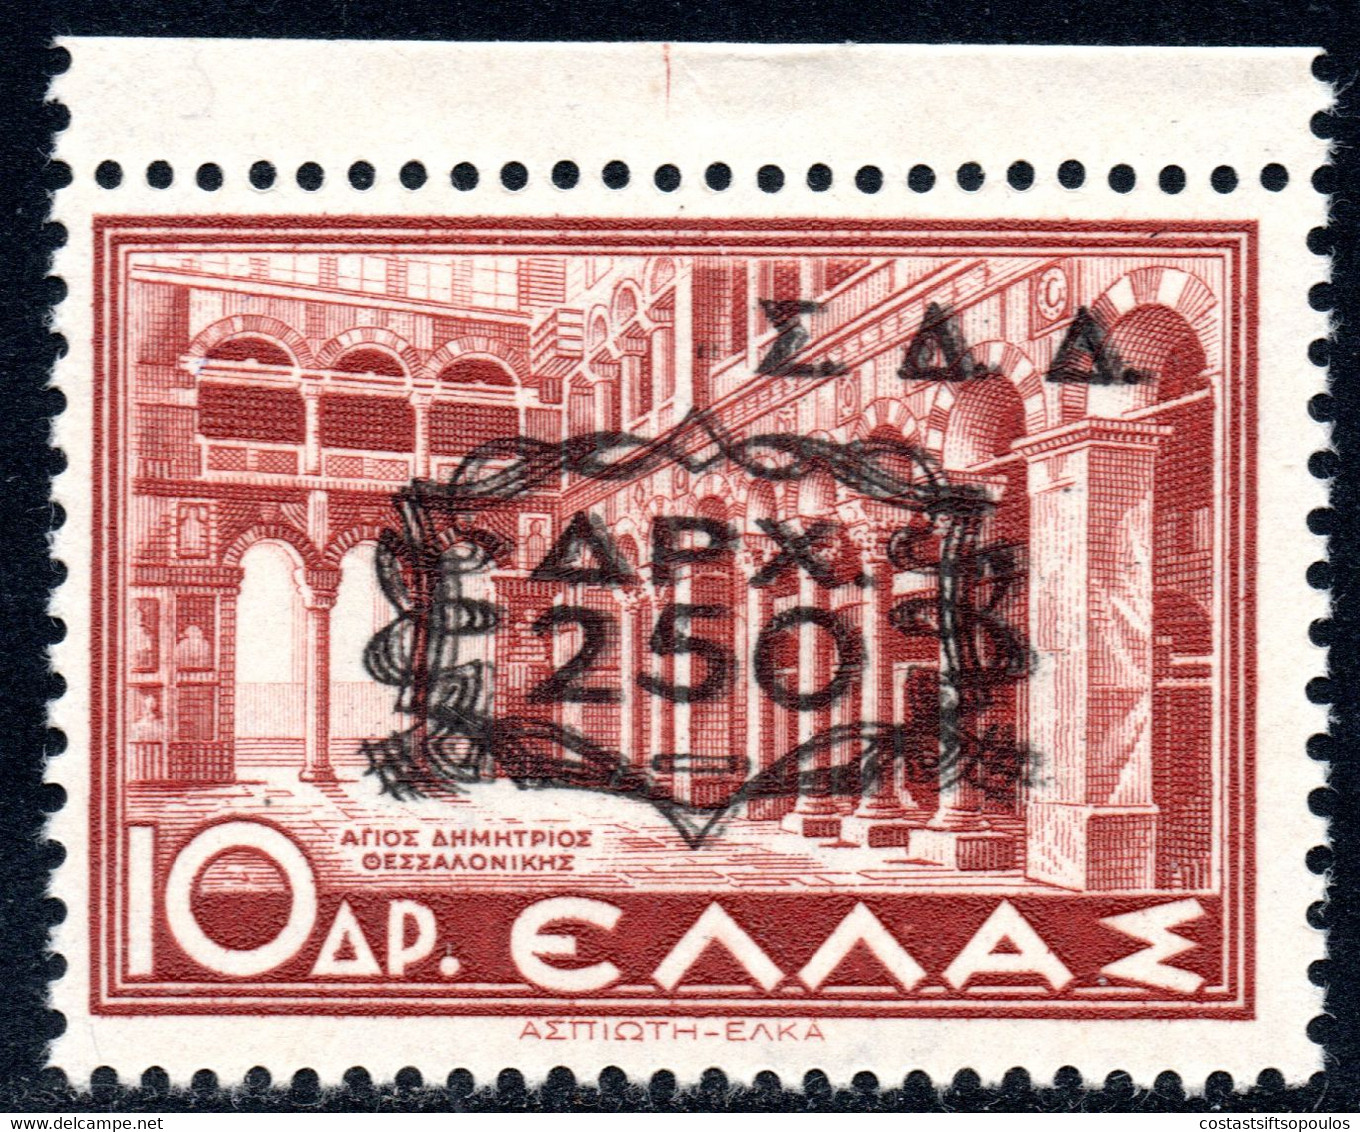 372.GREECE.DODECANESE,1947 Σ.Δ.Δ 250/10 DR.#7 DOUBLE OVERPRINT,MNH(UNRECORDED) - Dodekanisos